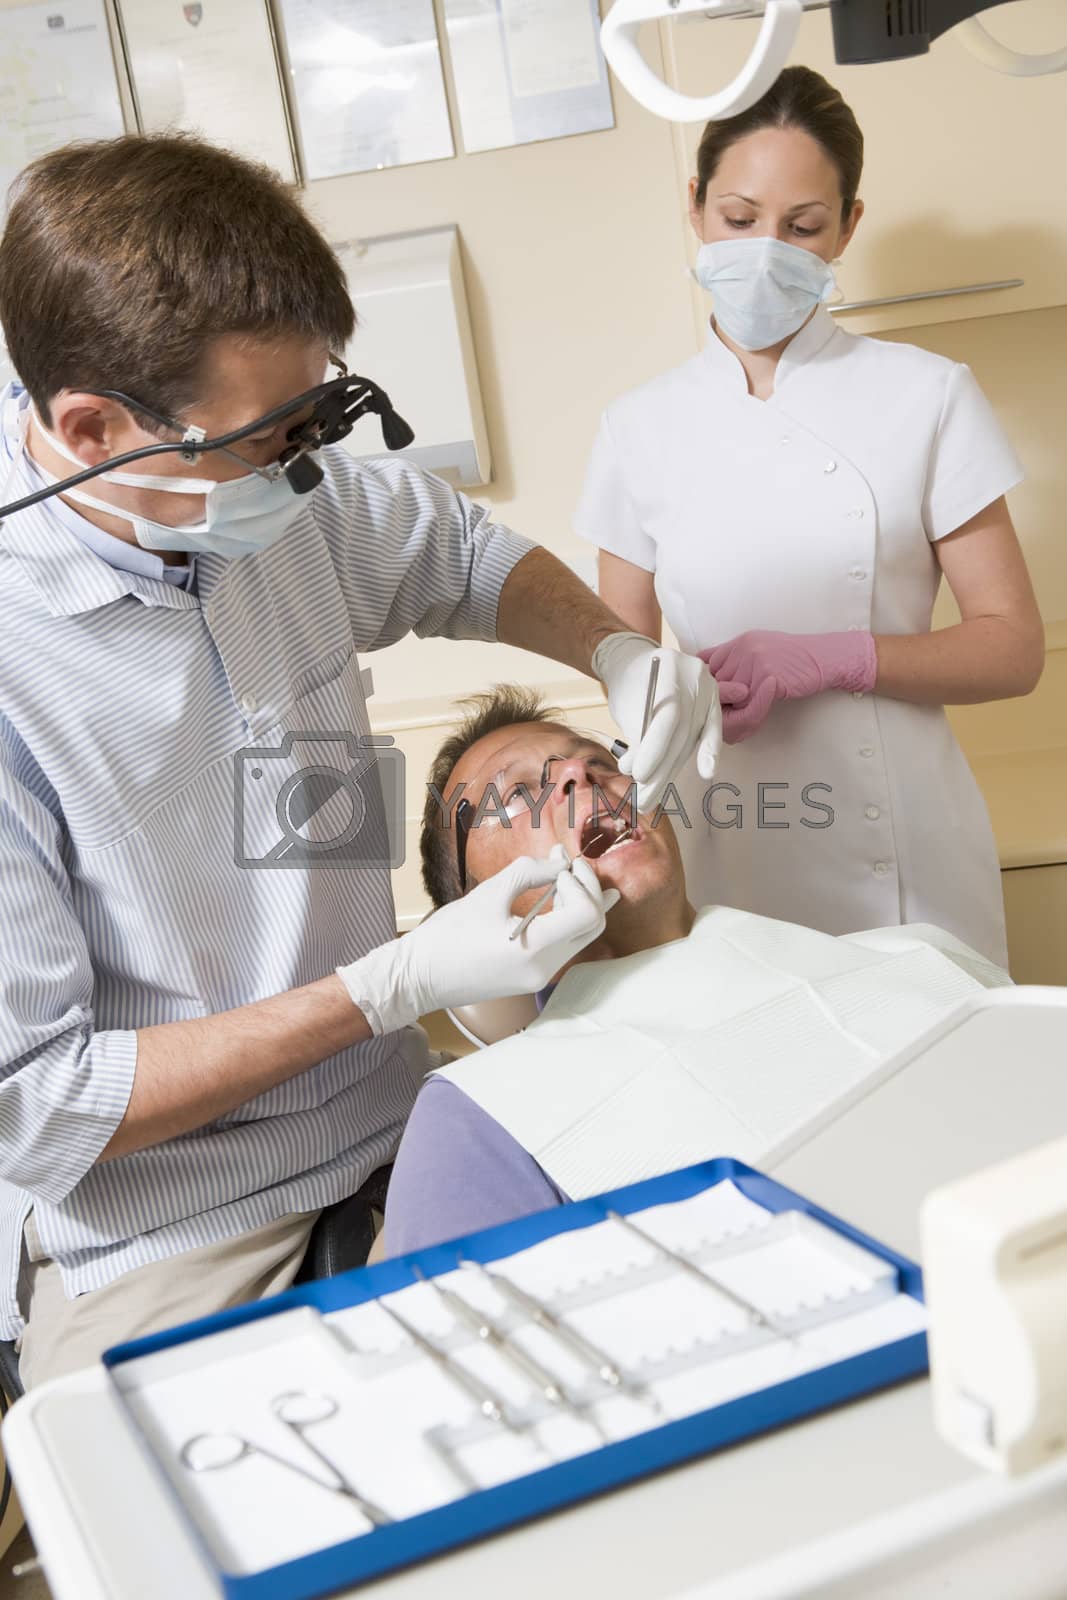 Royalty free image of Dentist and assistant in exam room with man in chair by MonkeyBusiness